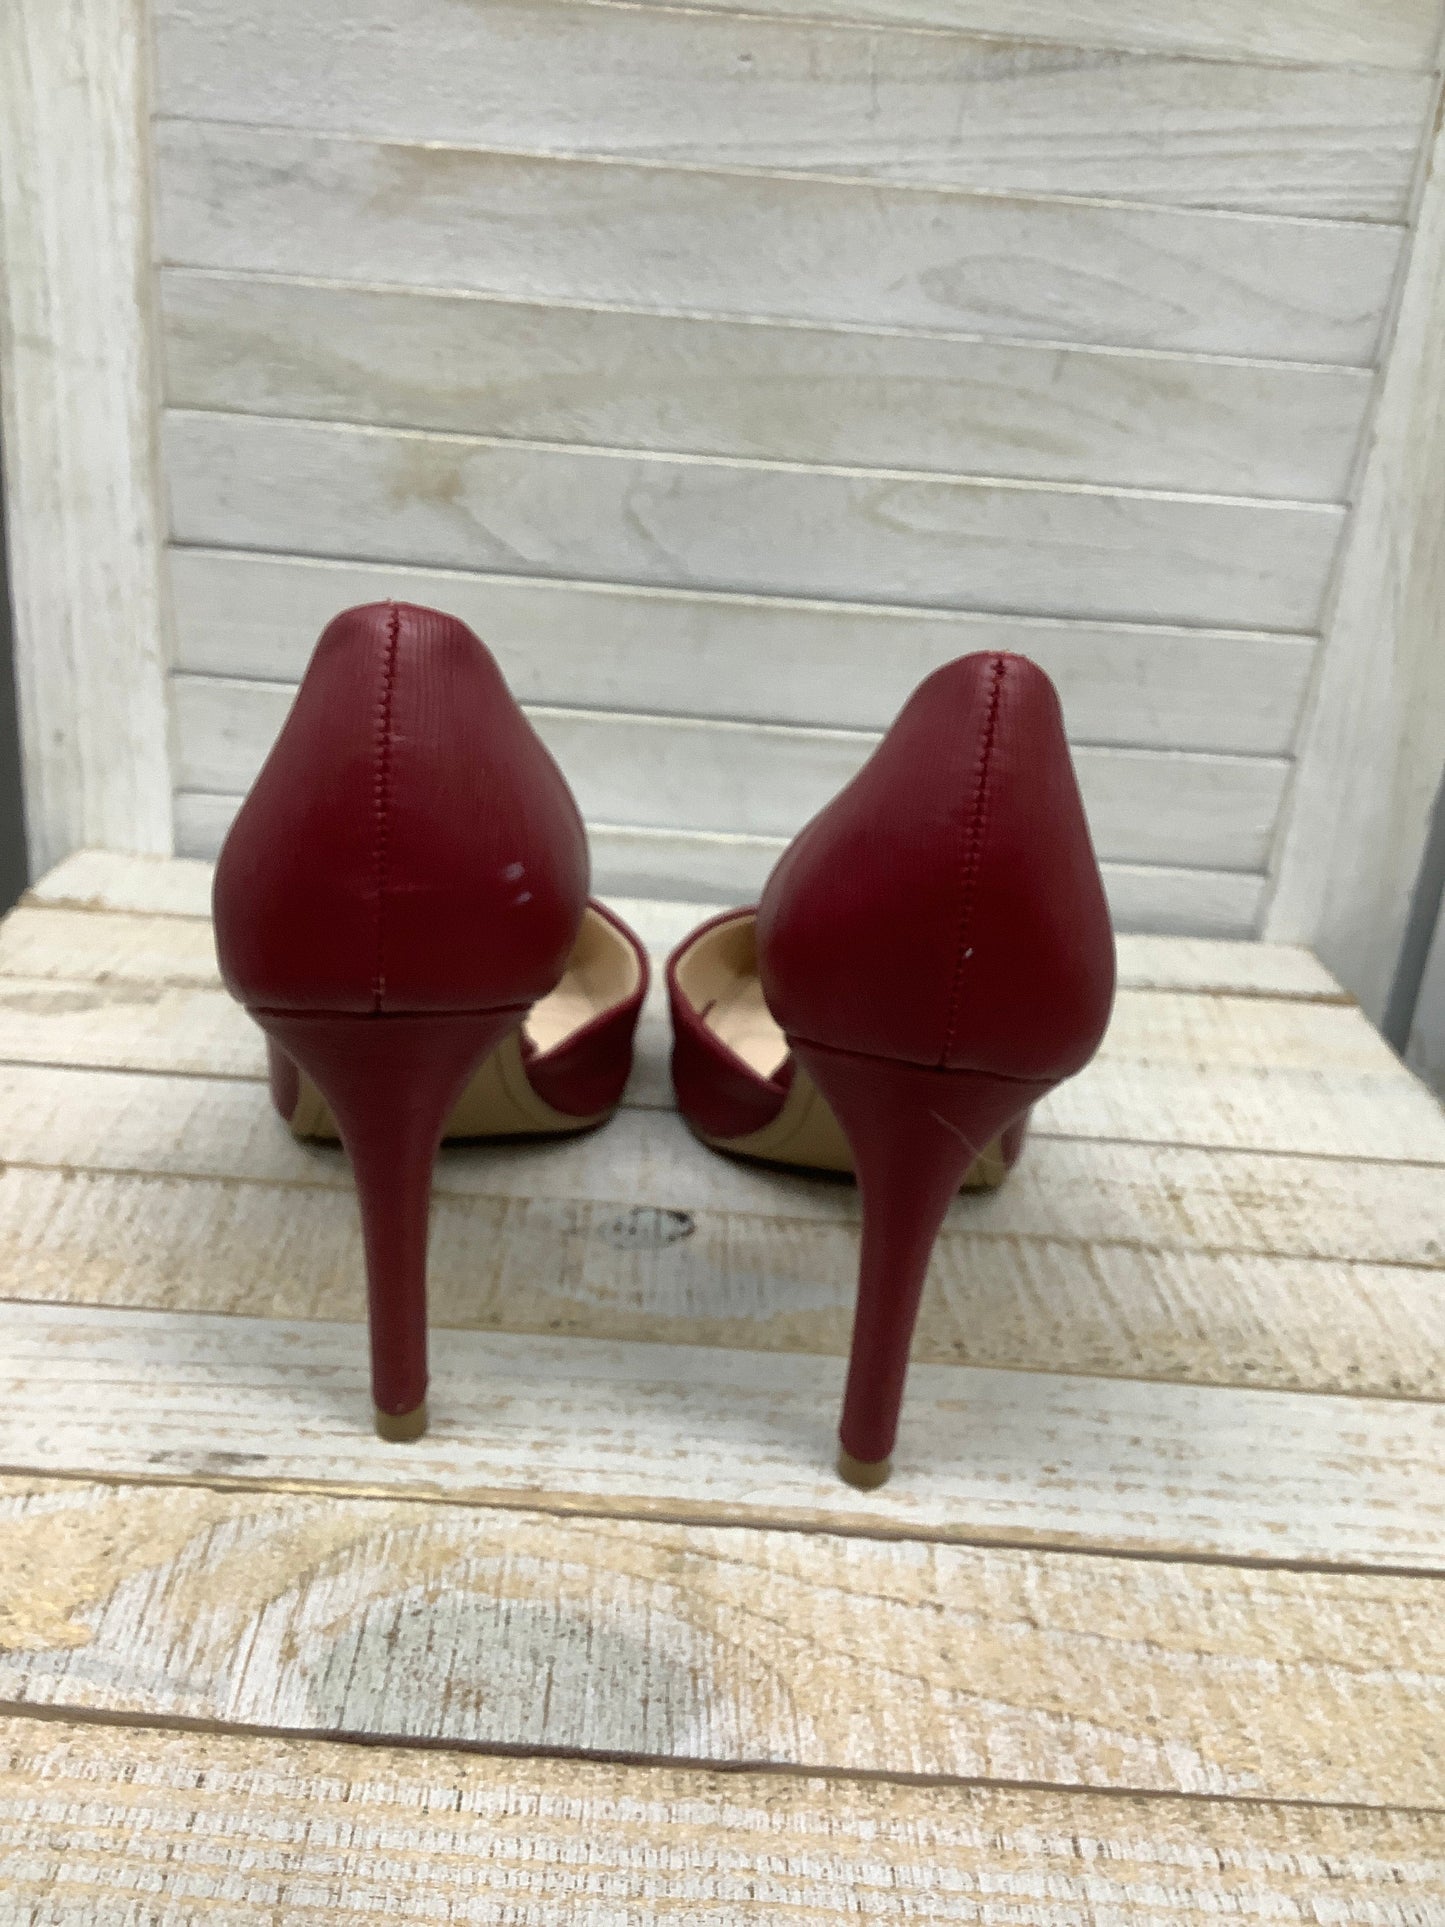 Shoes Heels Stiletto By Kelly And Katie  Size: 8